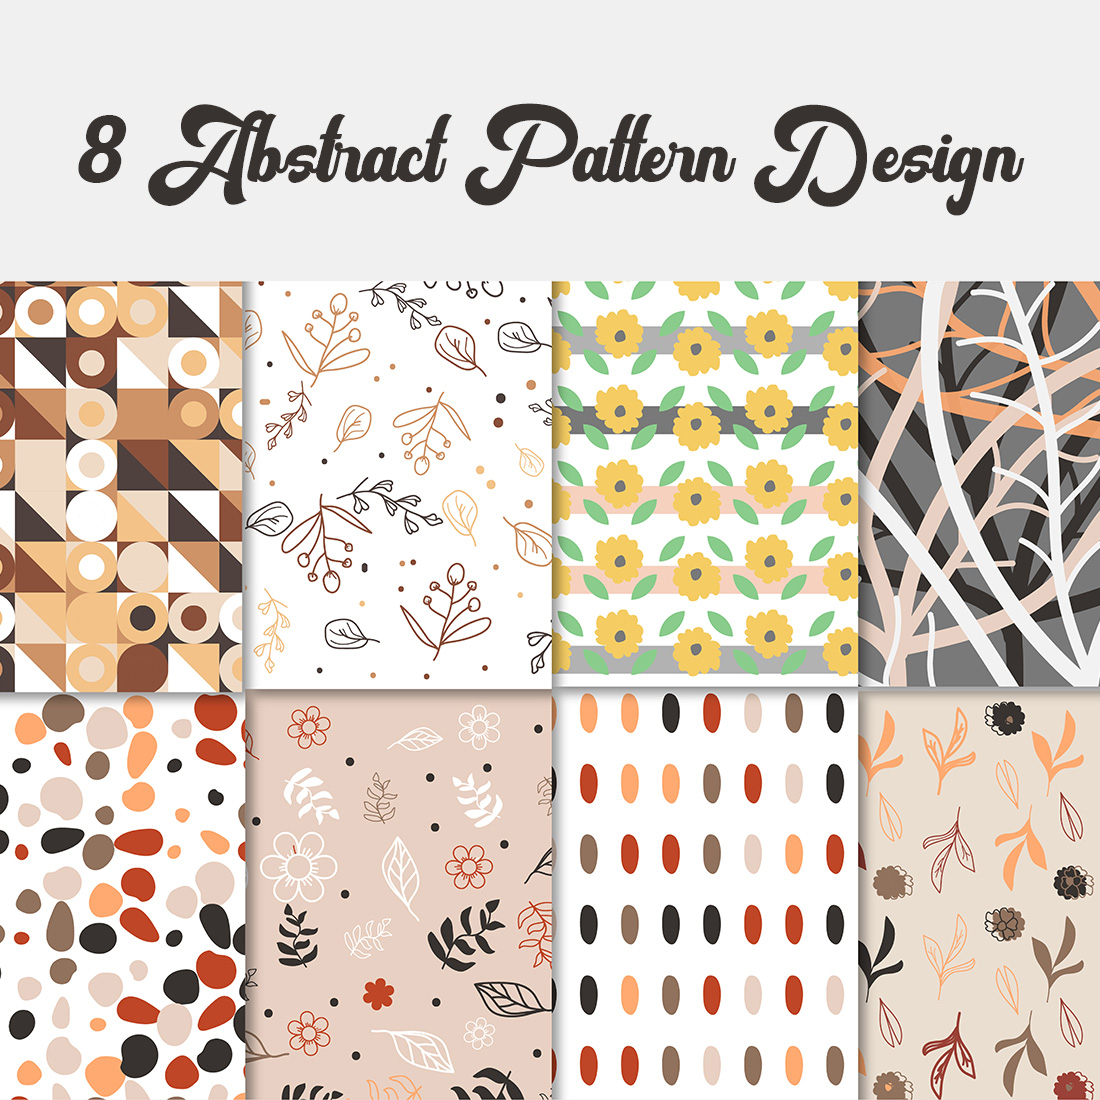 8 Different styles Abstract Pattern design cover image.